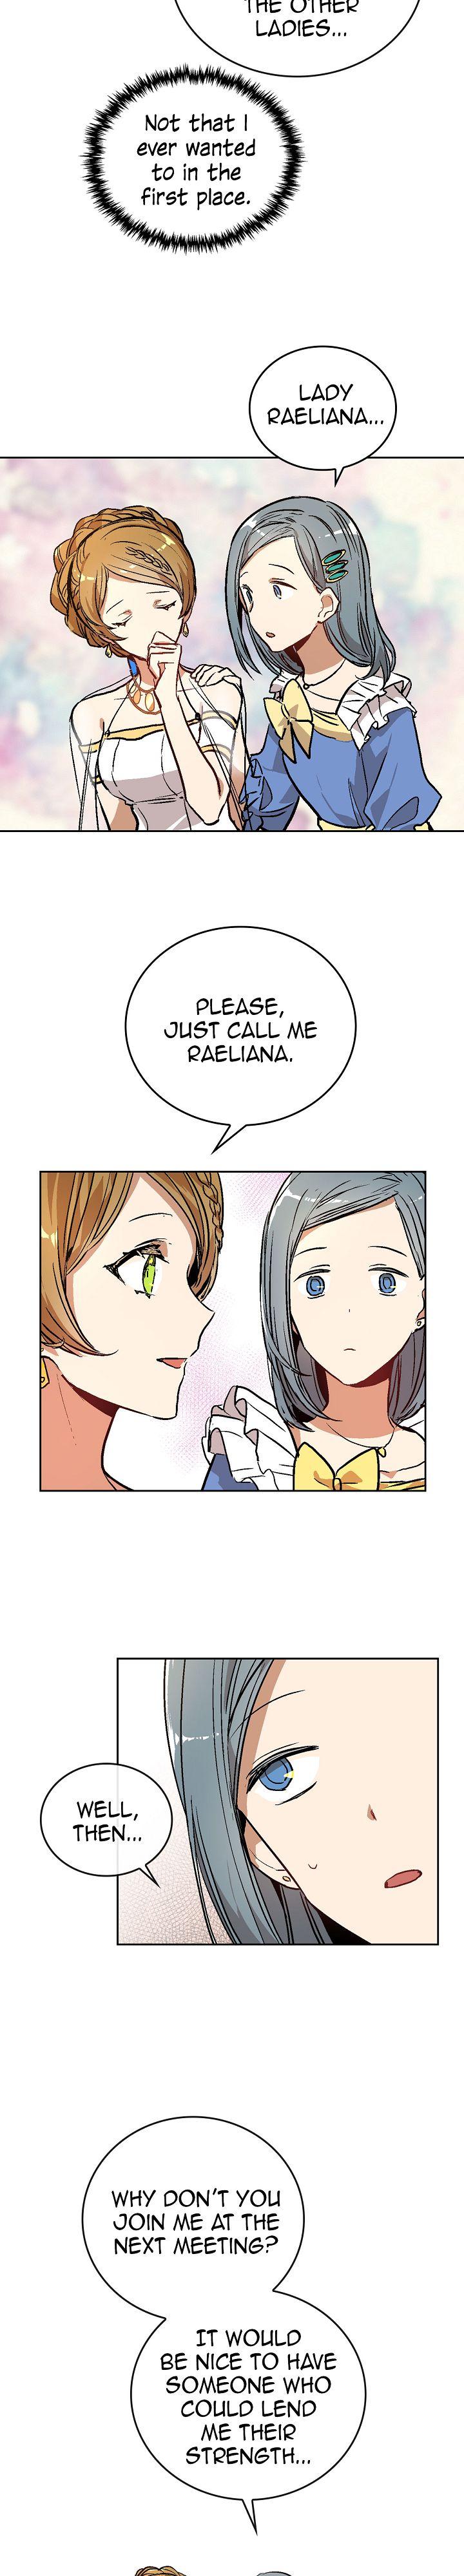 The Reason Why Raeliana Ended up at the Duke’s Mansion - Chapter 18 Page 4